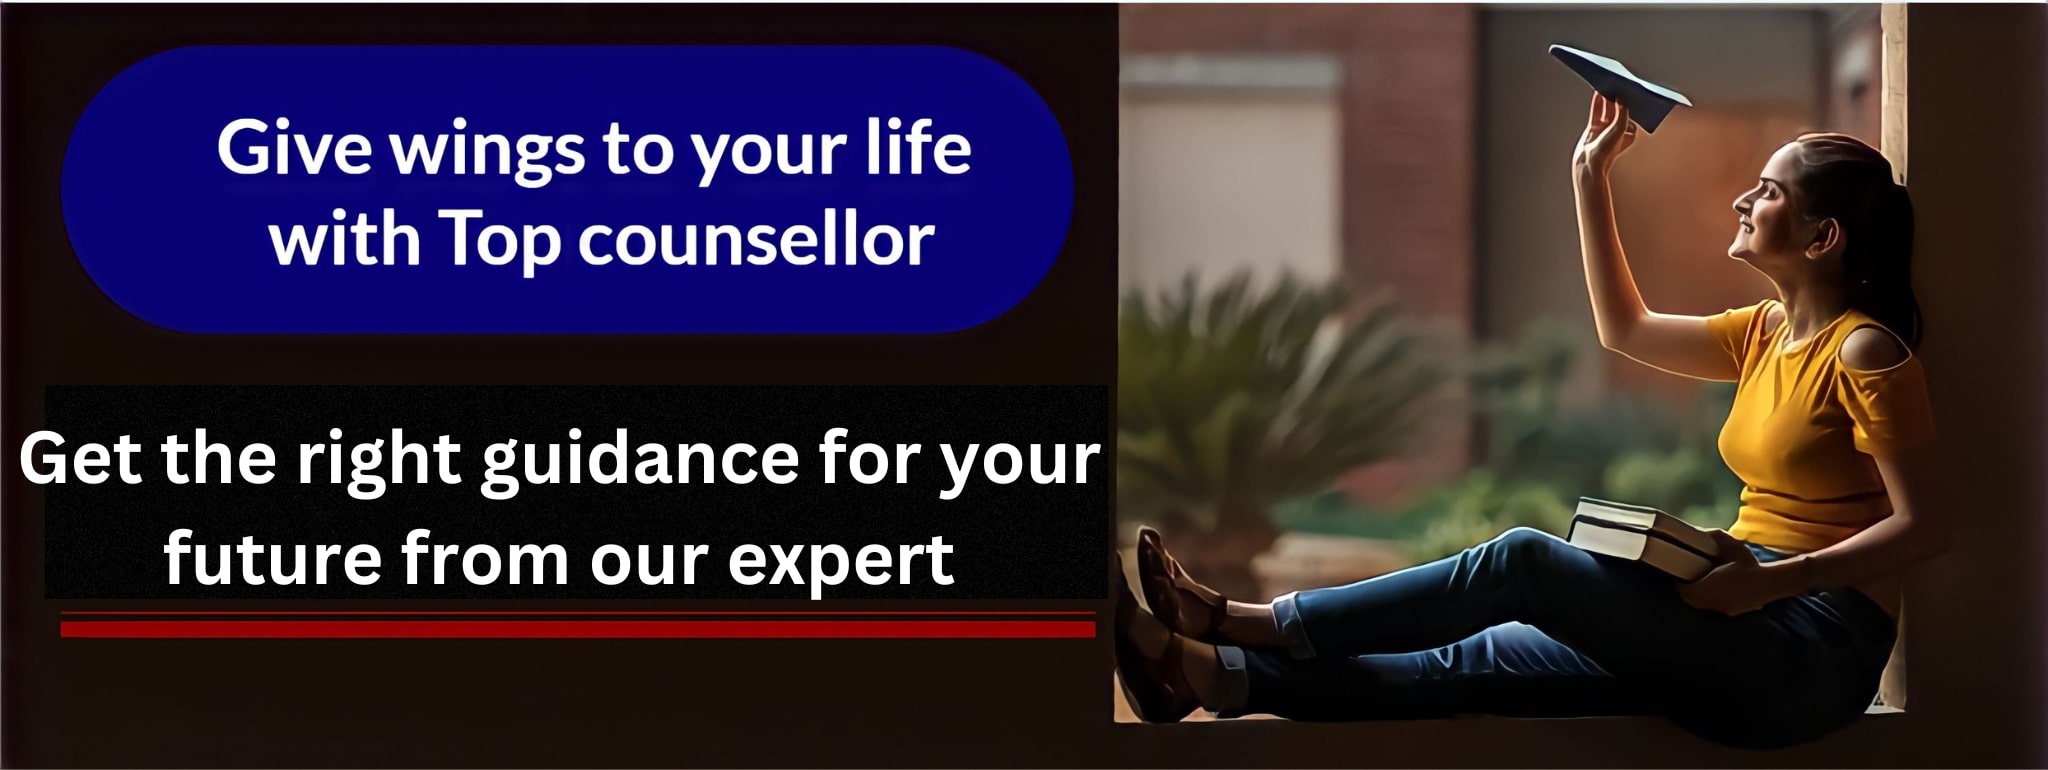 Get the higher education counselling